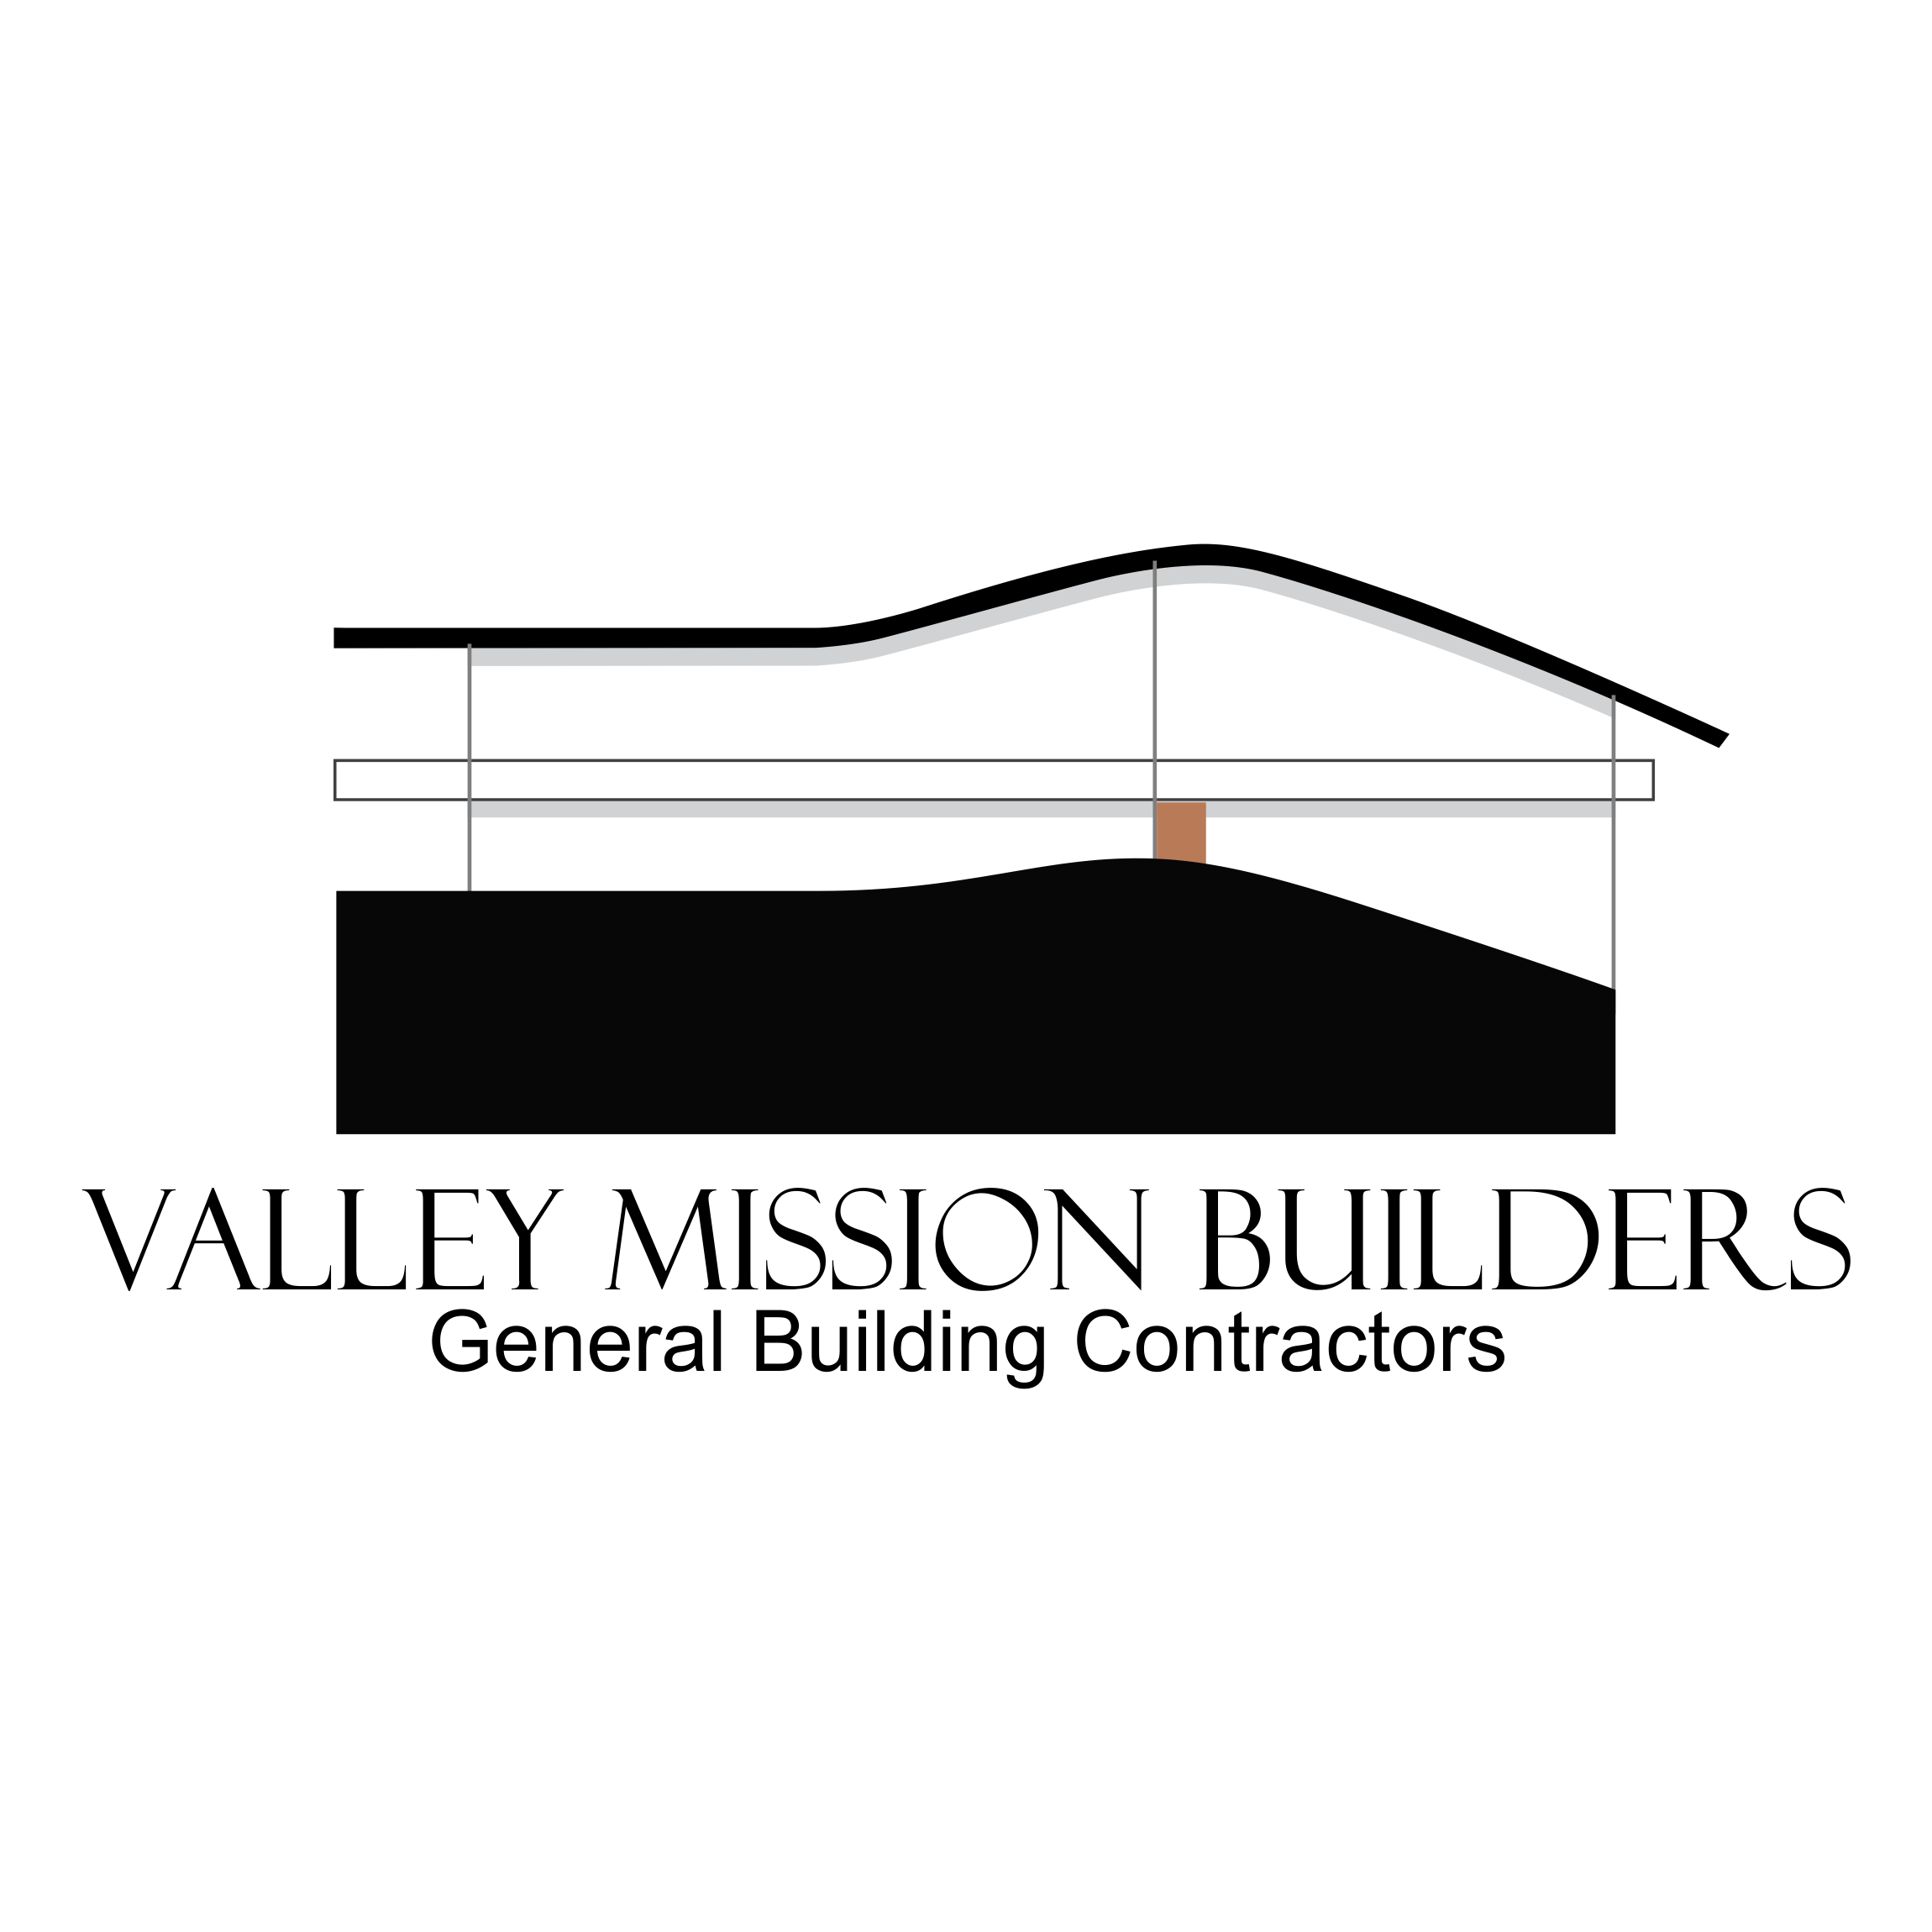 Valley Mission Builders